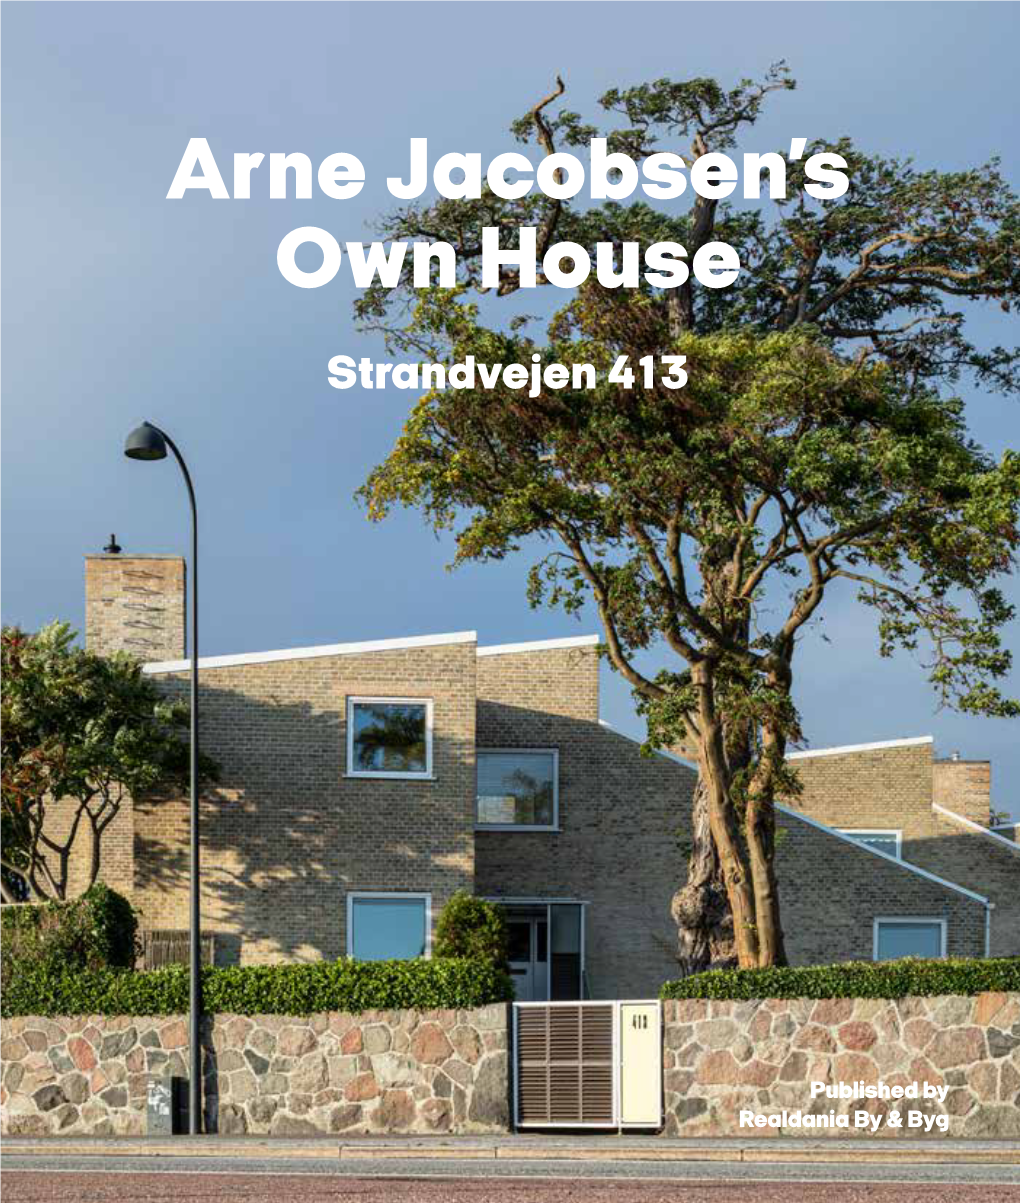 Download the Publication Arne Jacobsen's Own House